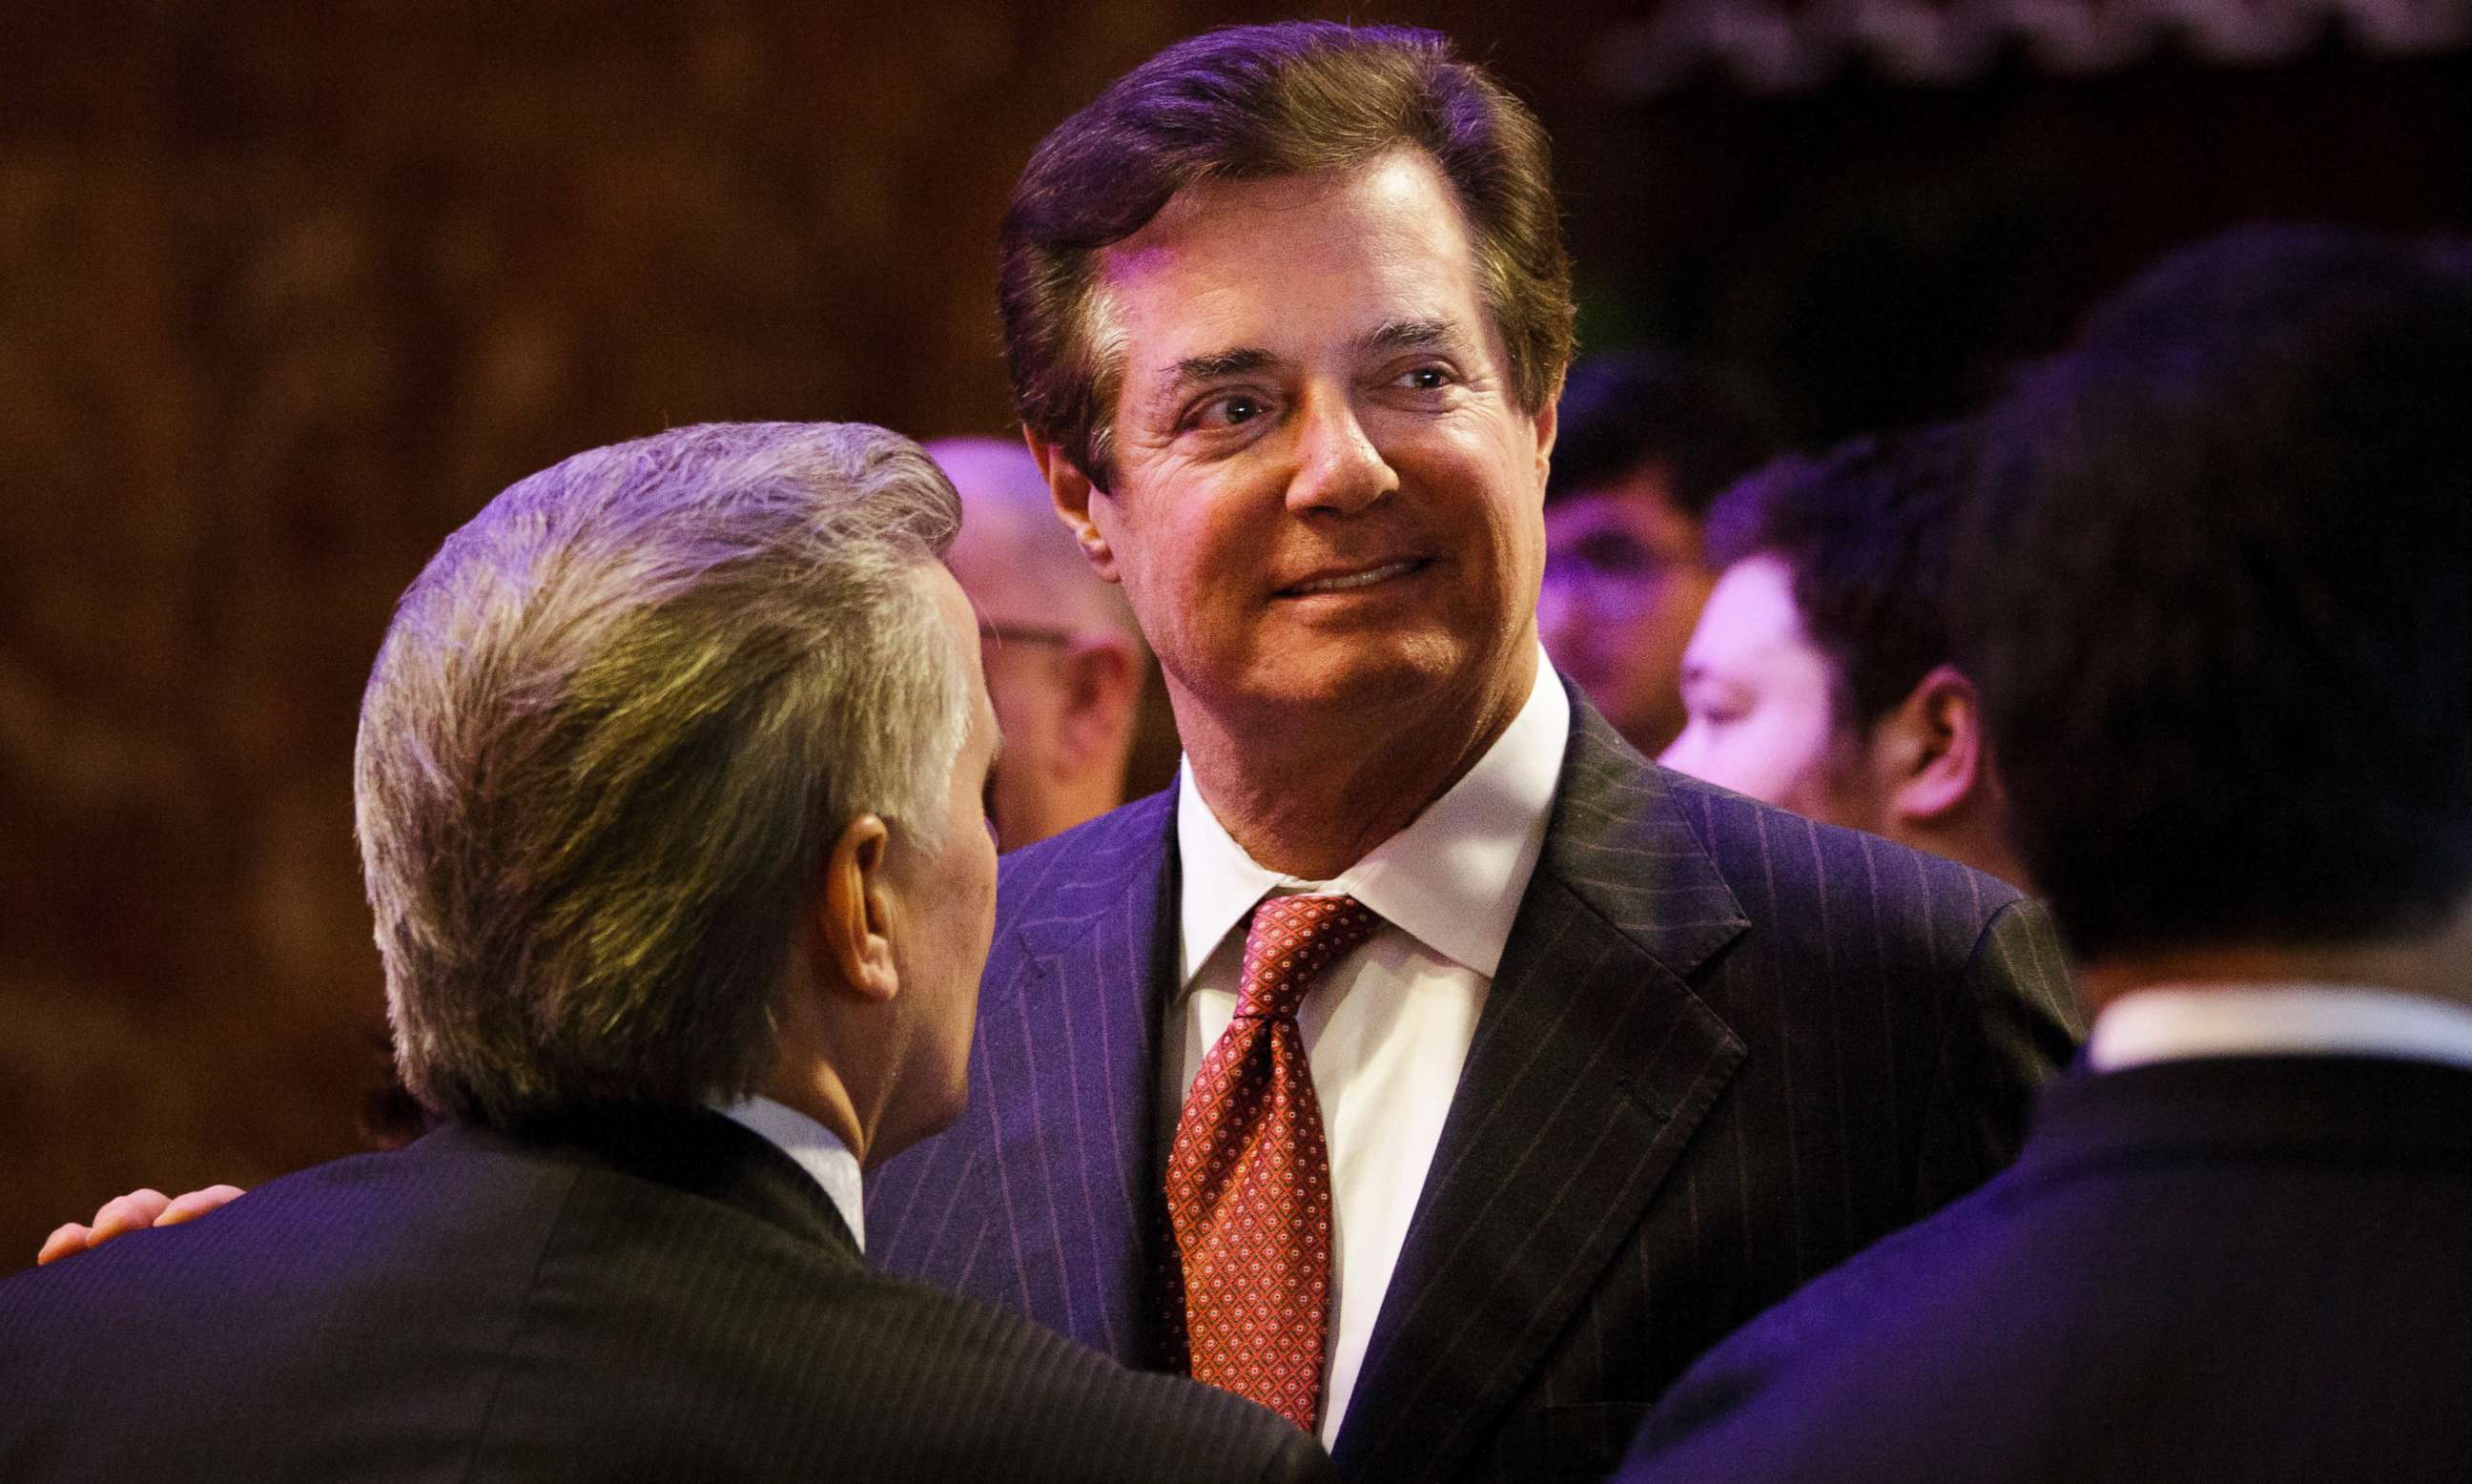 PHOTO: Former head of the Trump presidential campaign Paul Manafort talks with supporters and staff after a speech by Trump on the eve of his Indiana primary victory in New York, May 3, 2016.